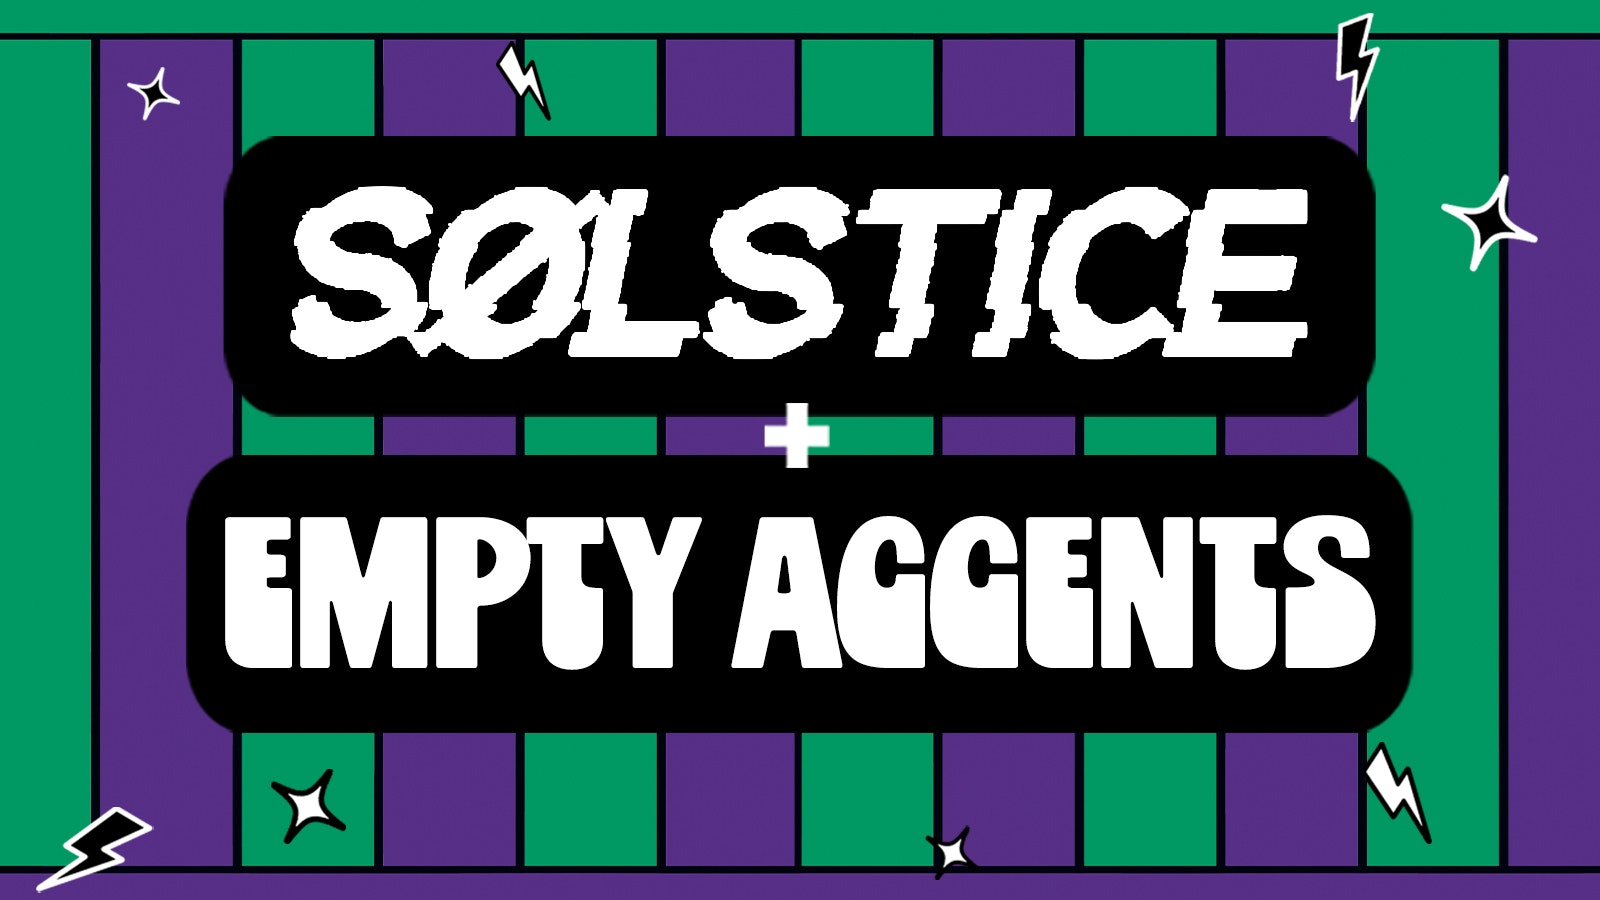 Solstice & Empty Accents @ The Ship Isis